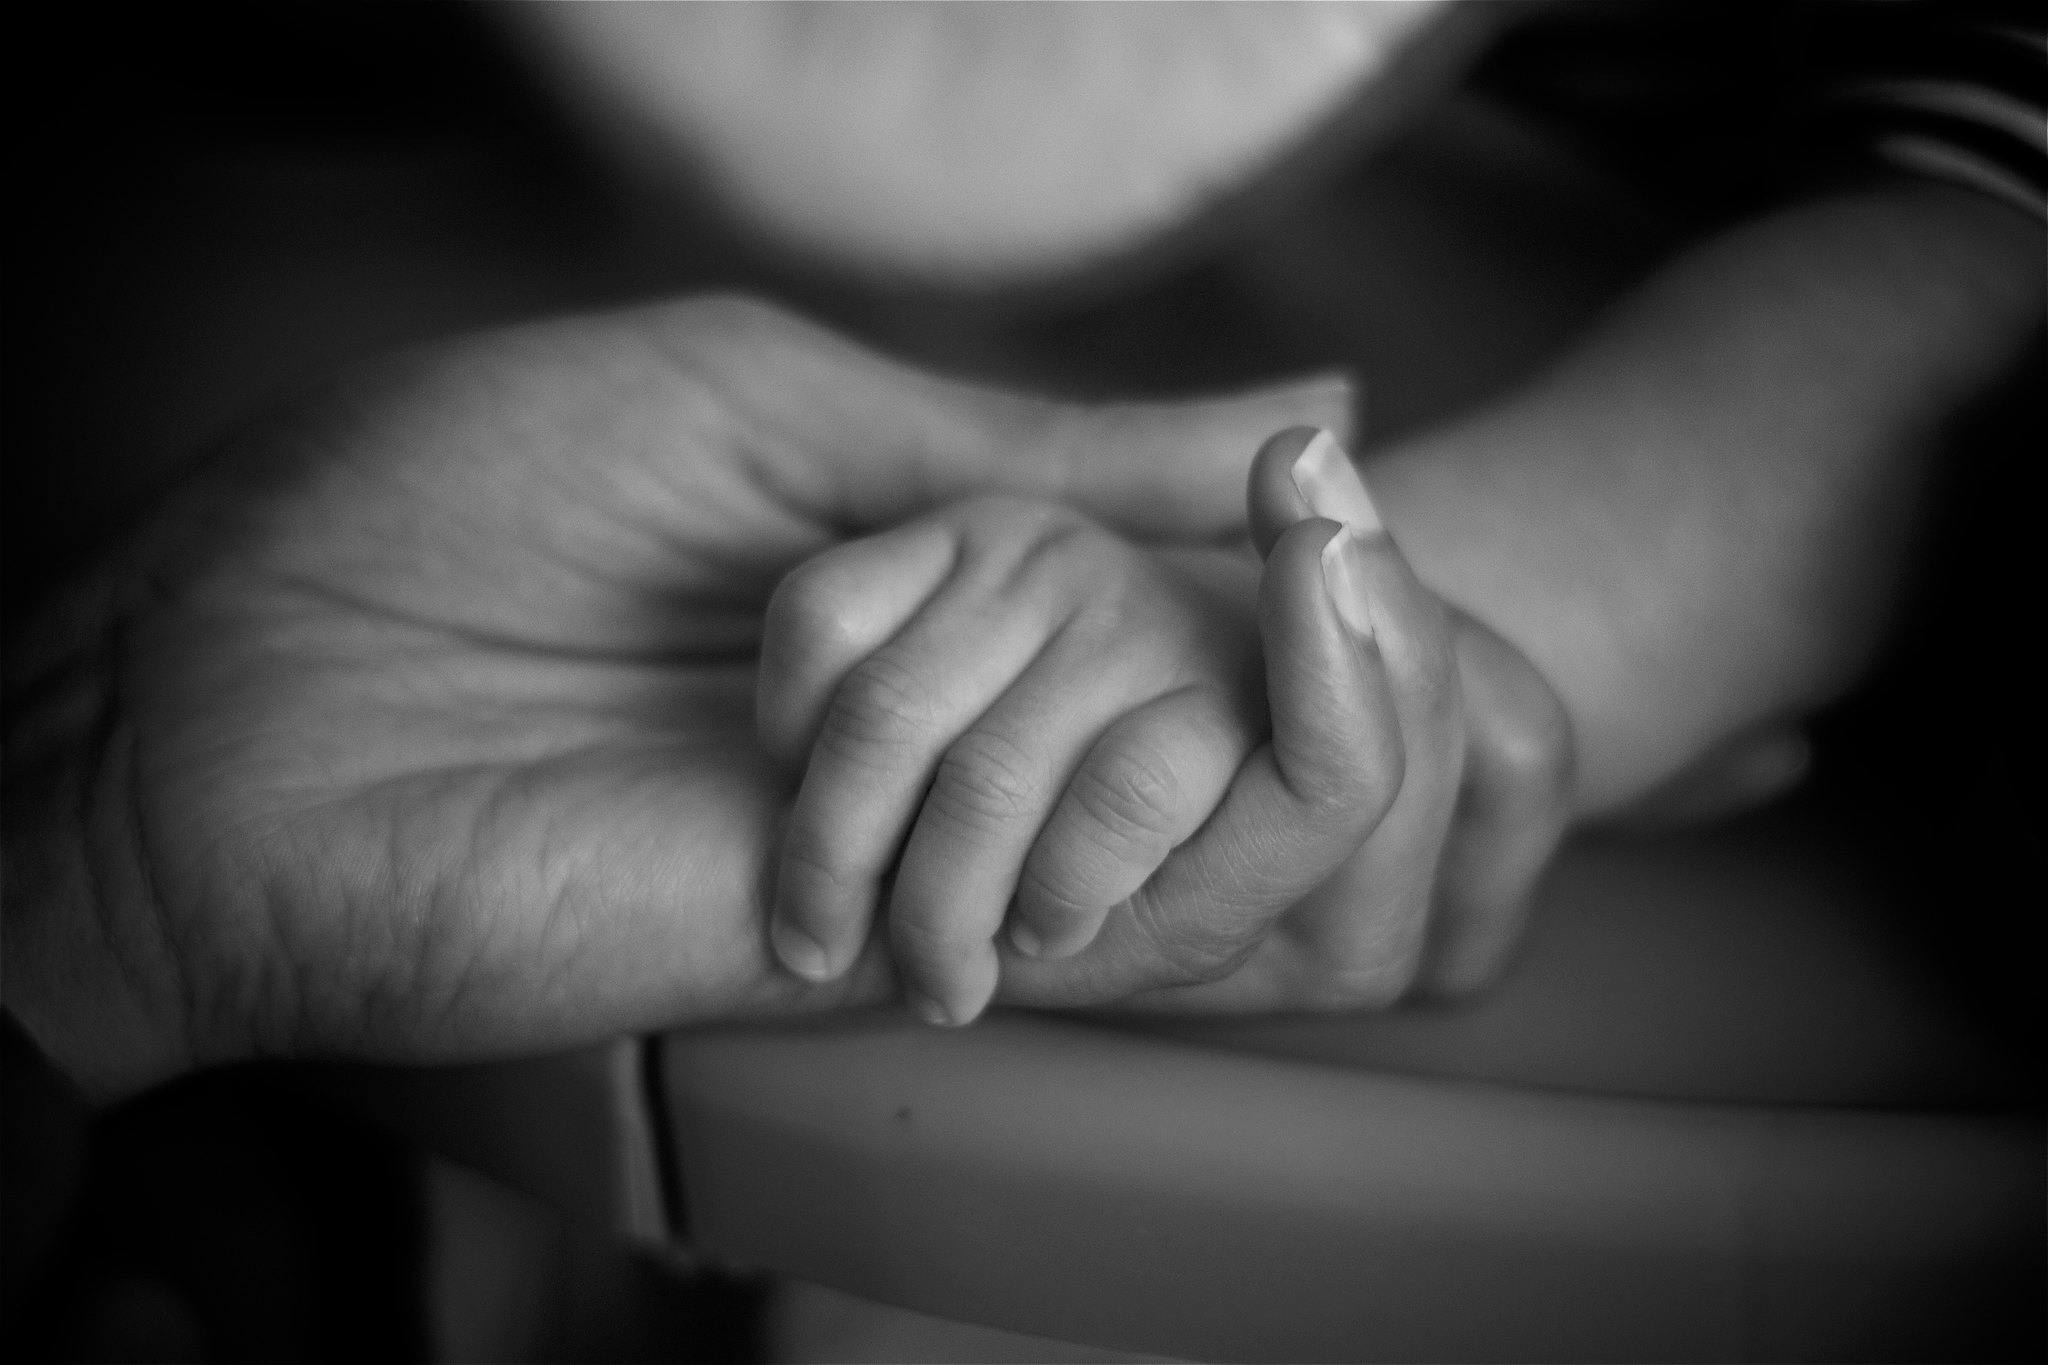 A hand of a parent holding the hand of an infant